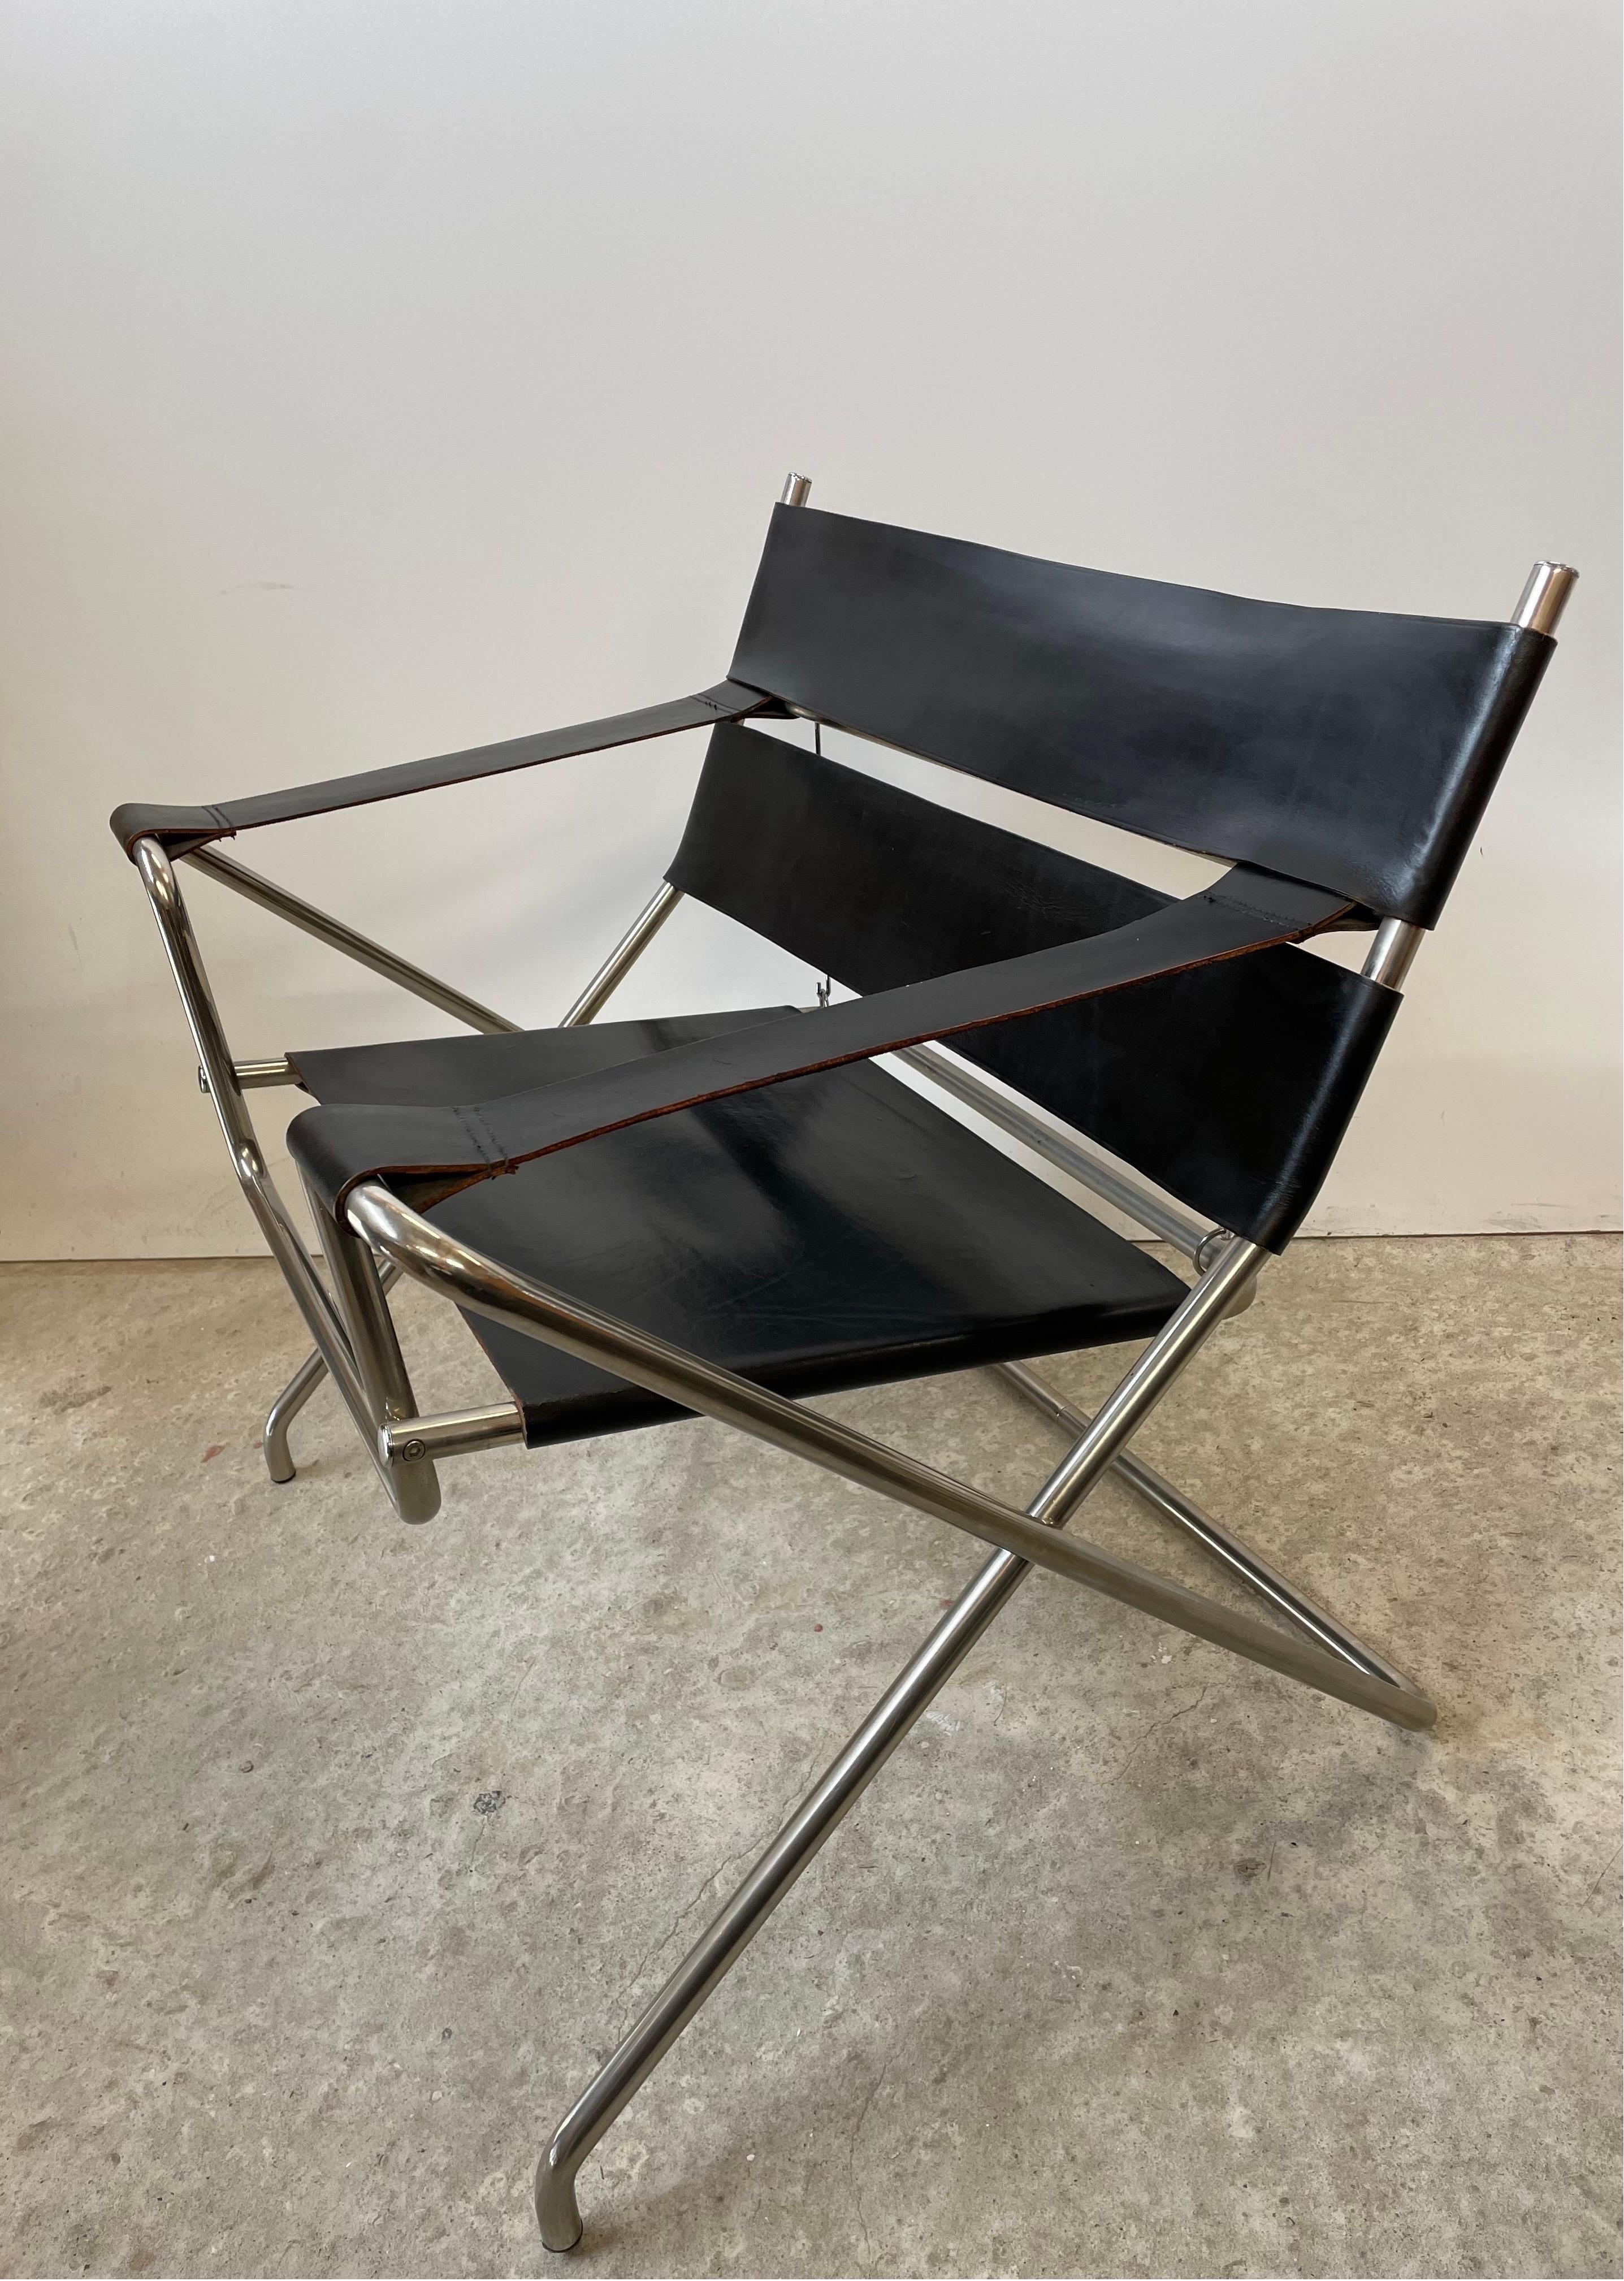 German D4 Foldingchair by Marcel Breuer for Tecta in Black Leather -1980 For Sale